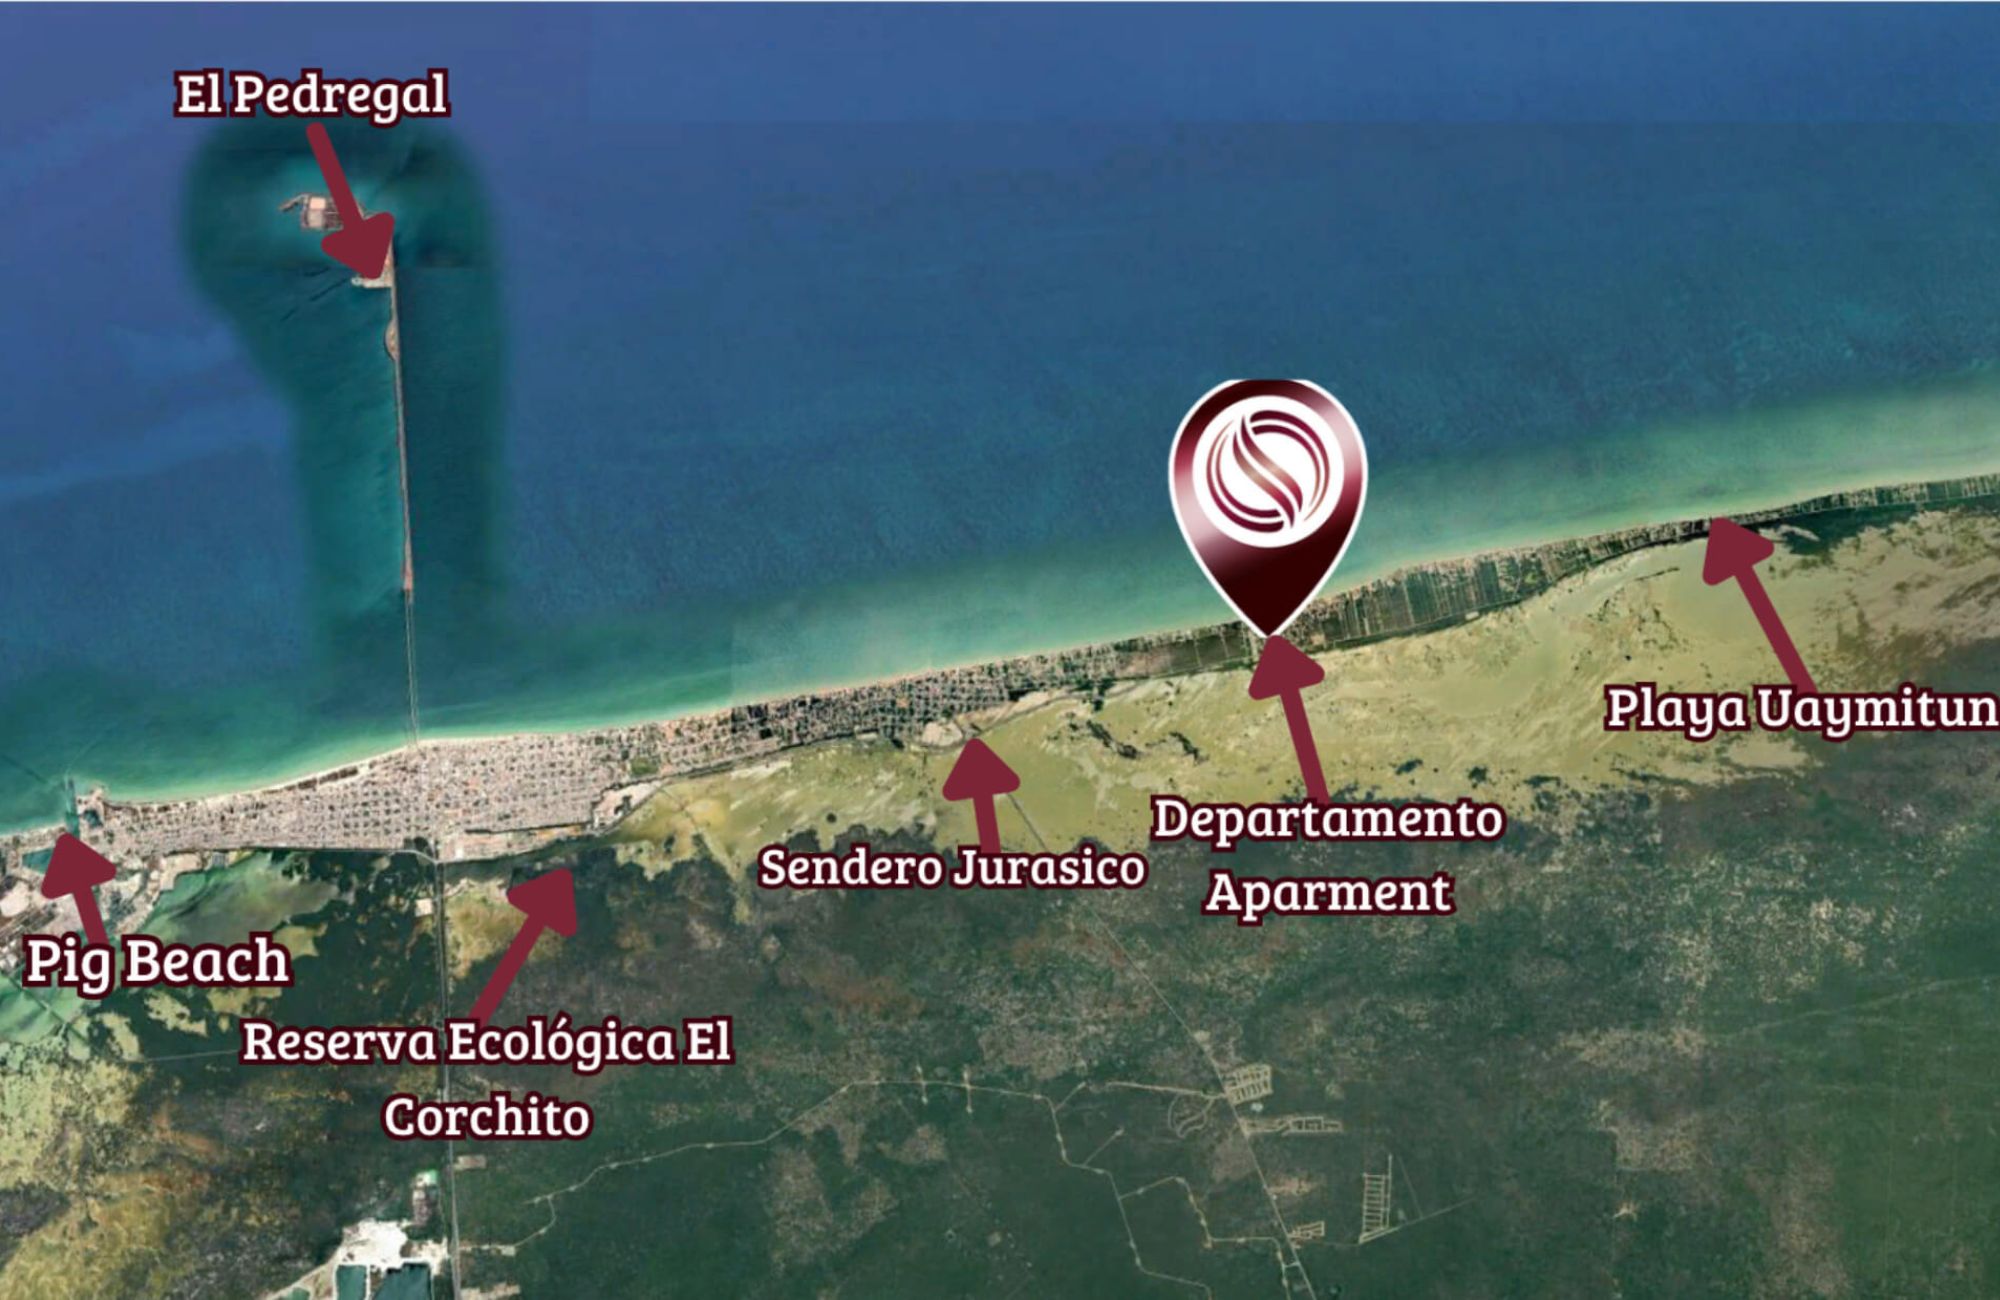 Steps from the beach apartment with terrace, grill and entertainment bar, Chicxulub Puerto, sale, for Mérida.